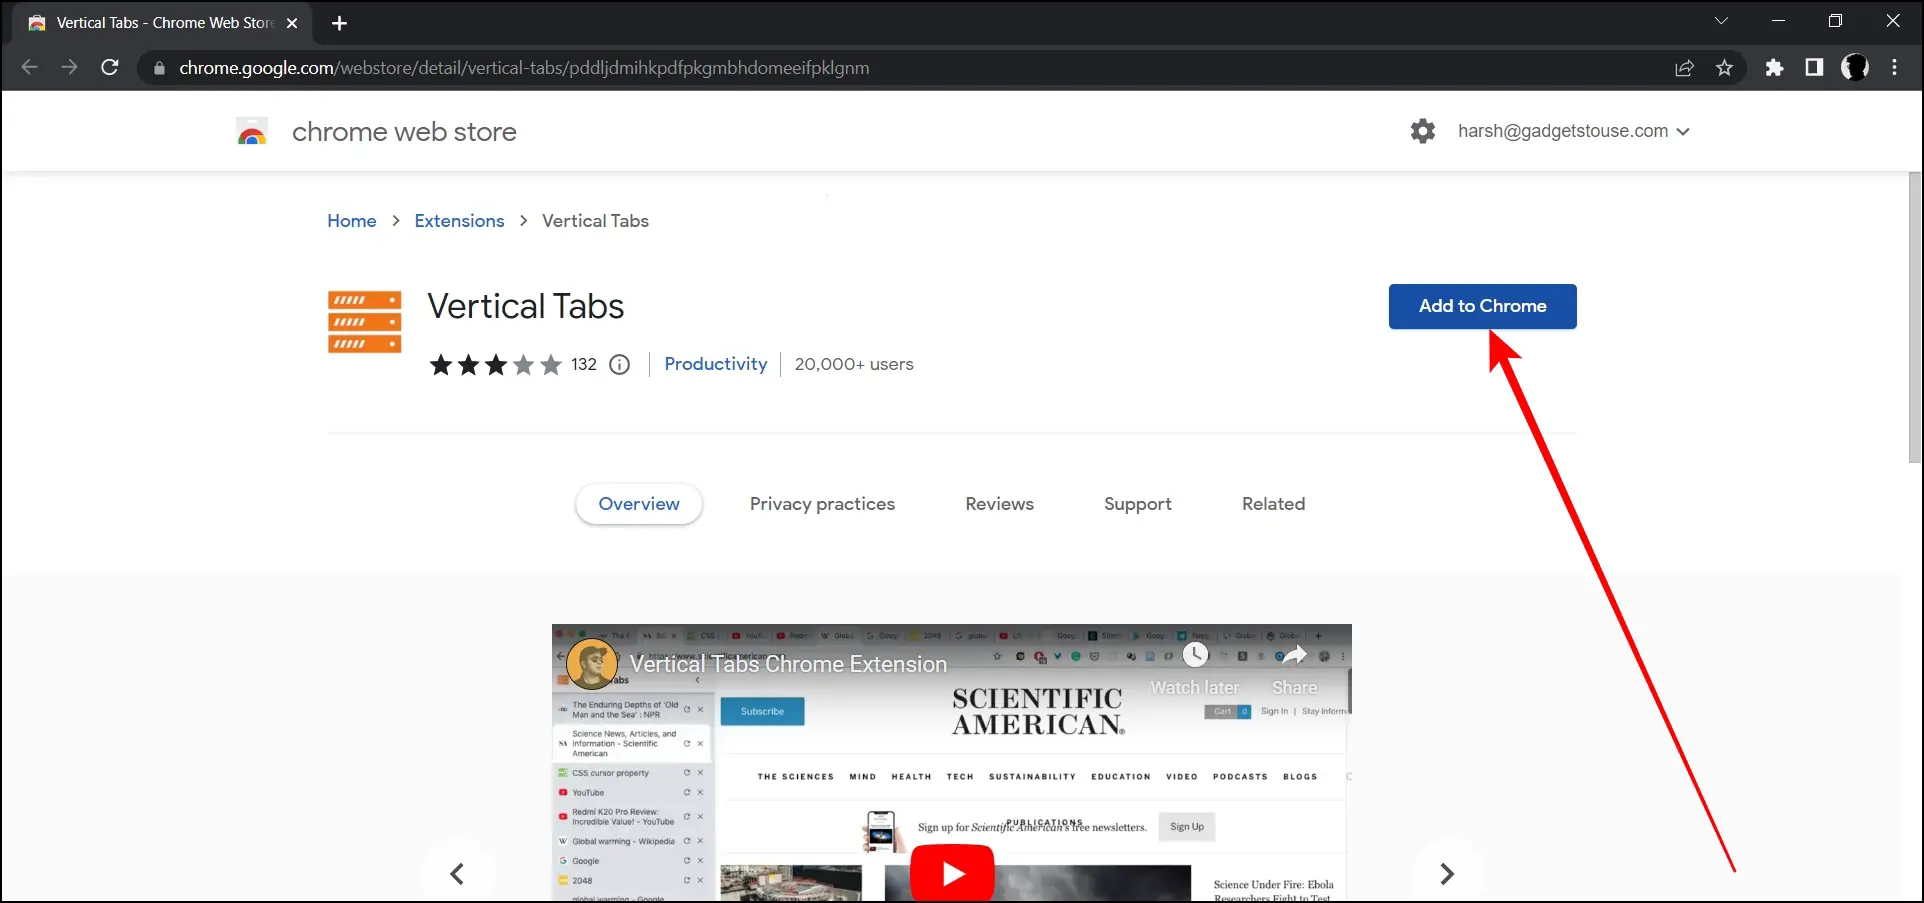 Enable Vertical Tabs To Deal With Too Many Tabs Opened in Chrome